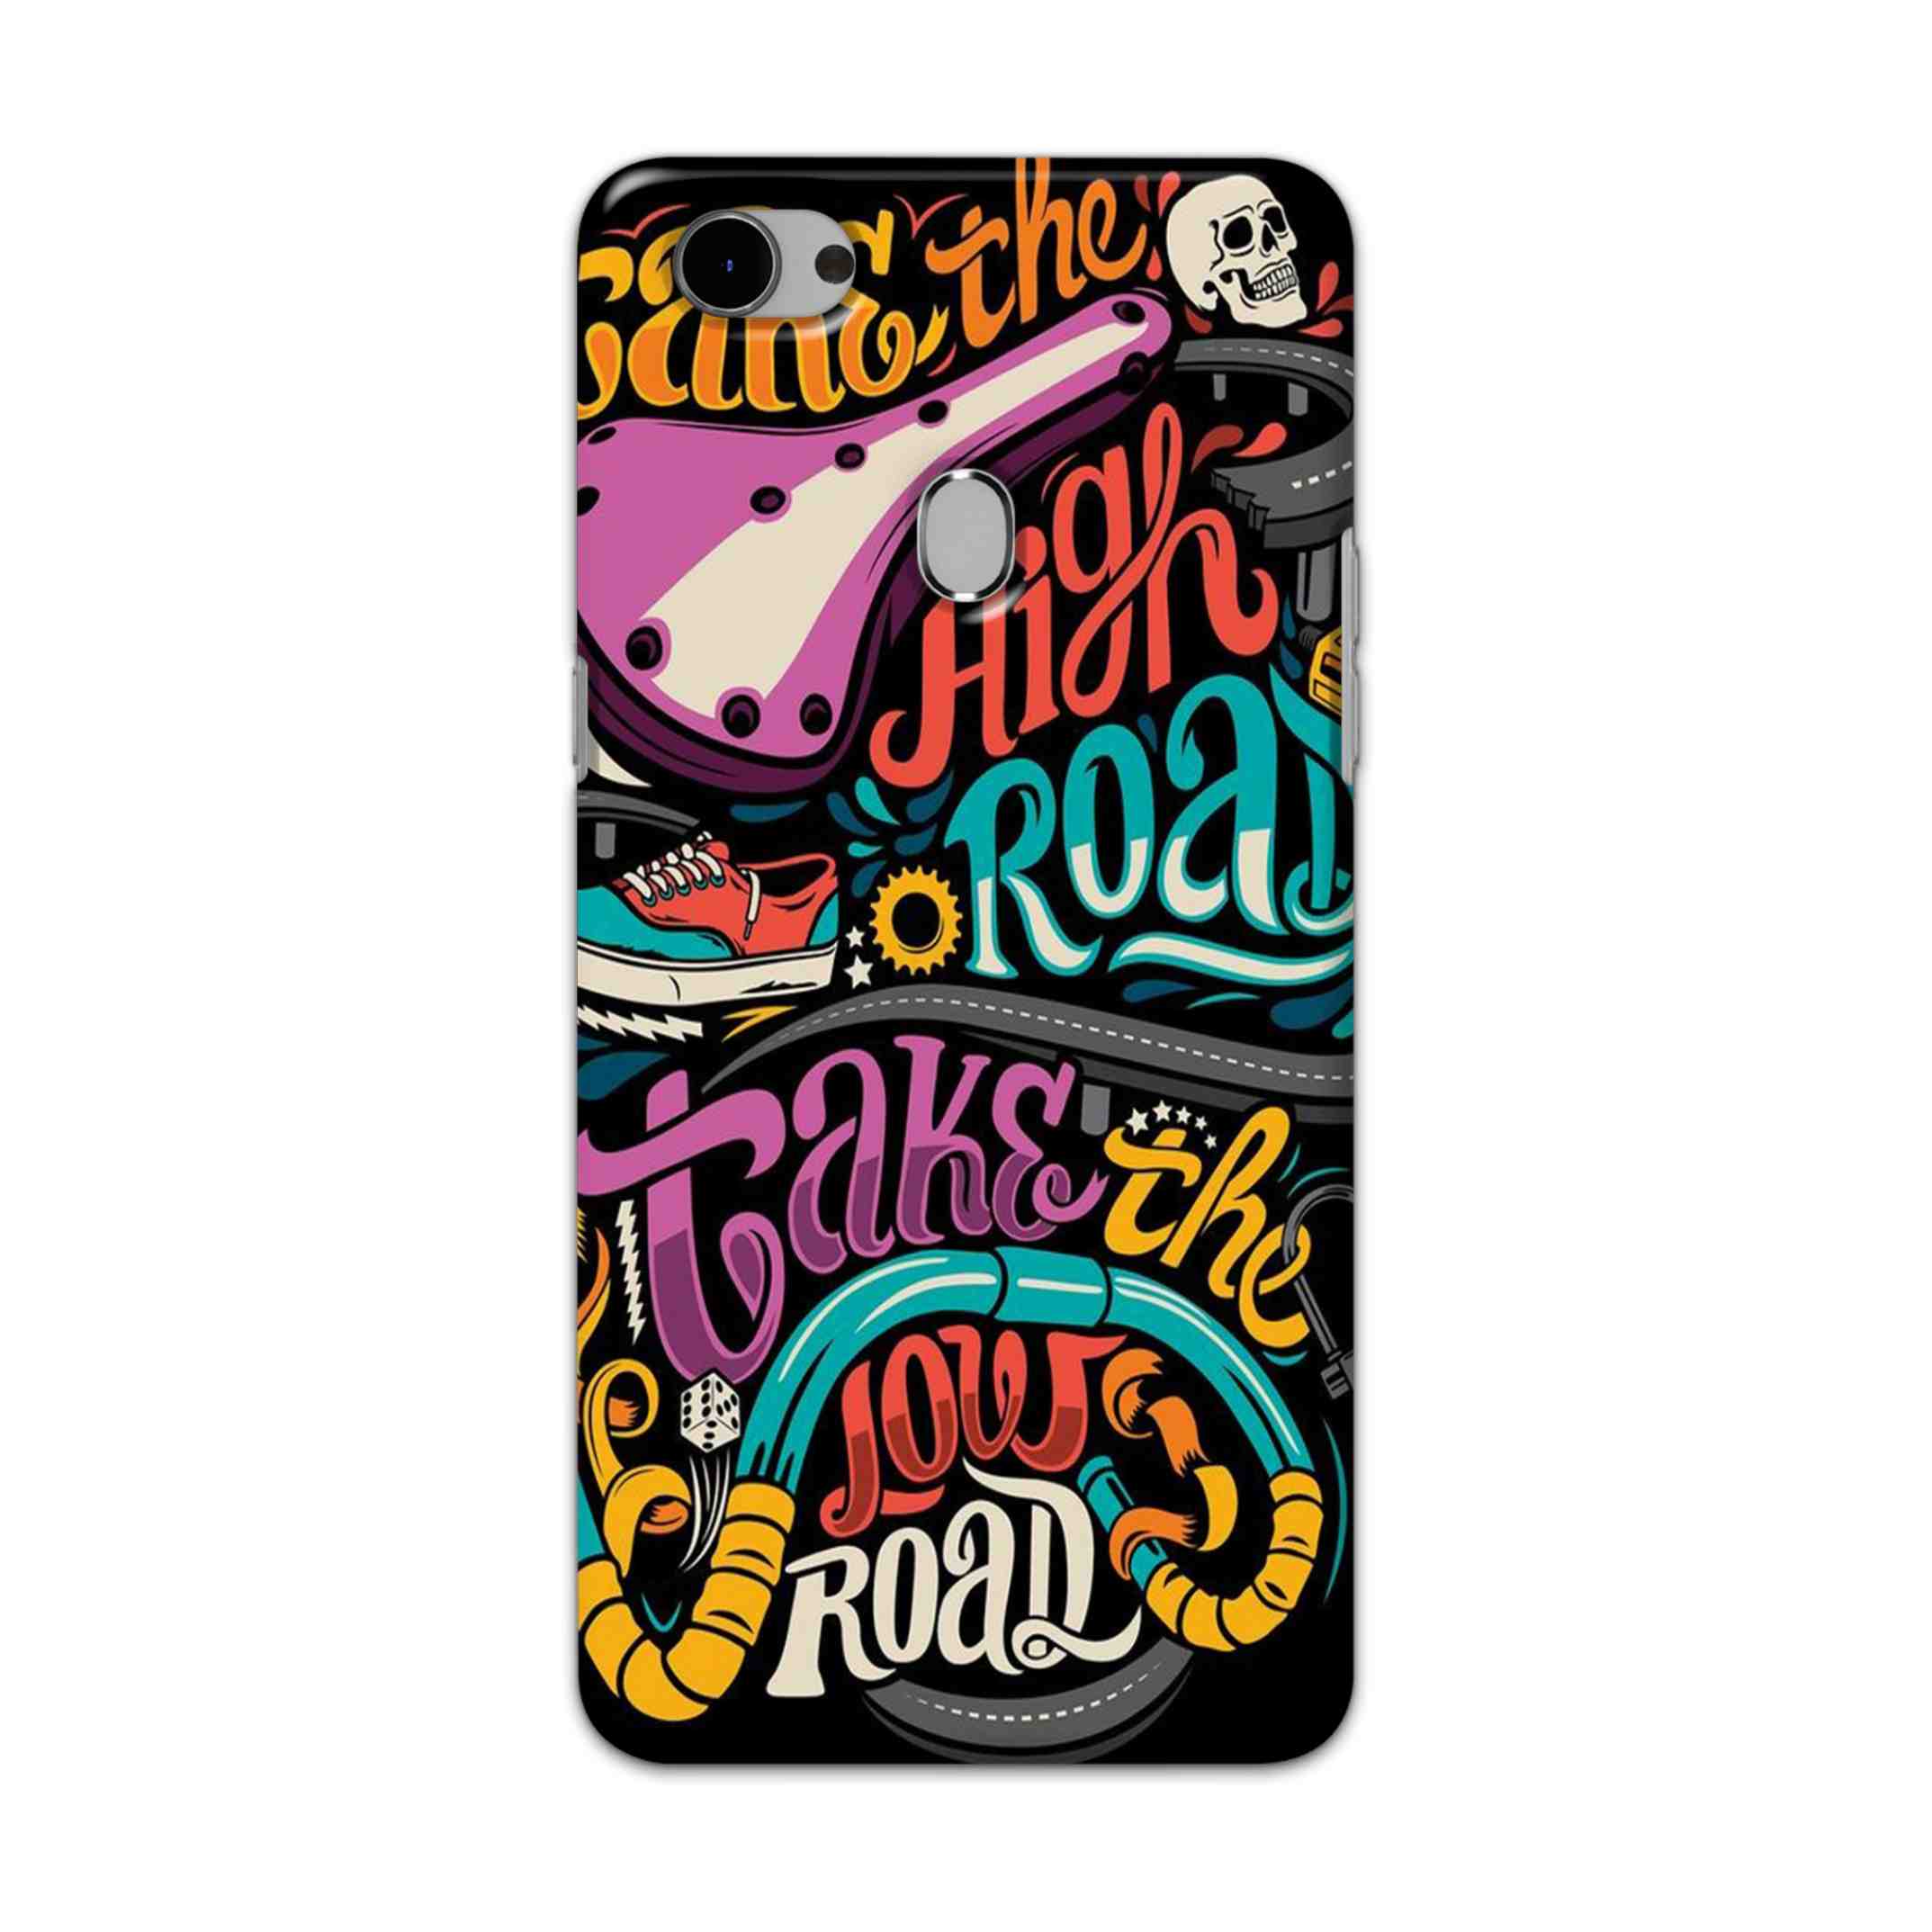 Buy Take The High Road Hard Back Mobile Phone Case Cover For Oppo F7 Online